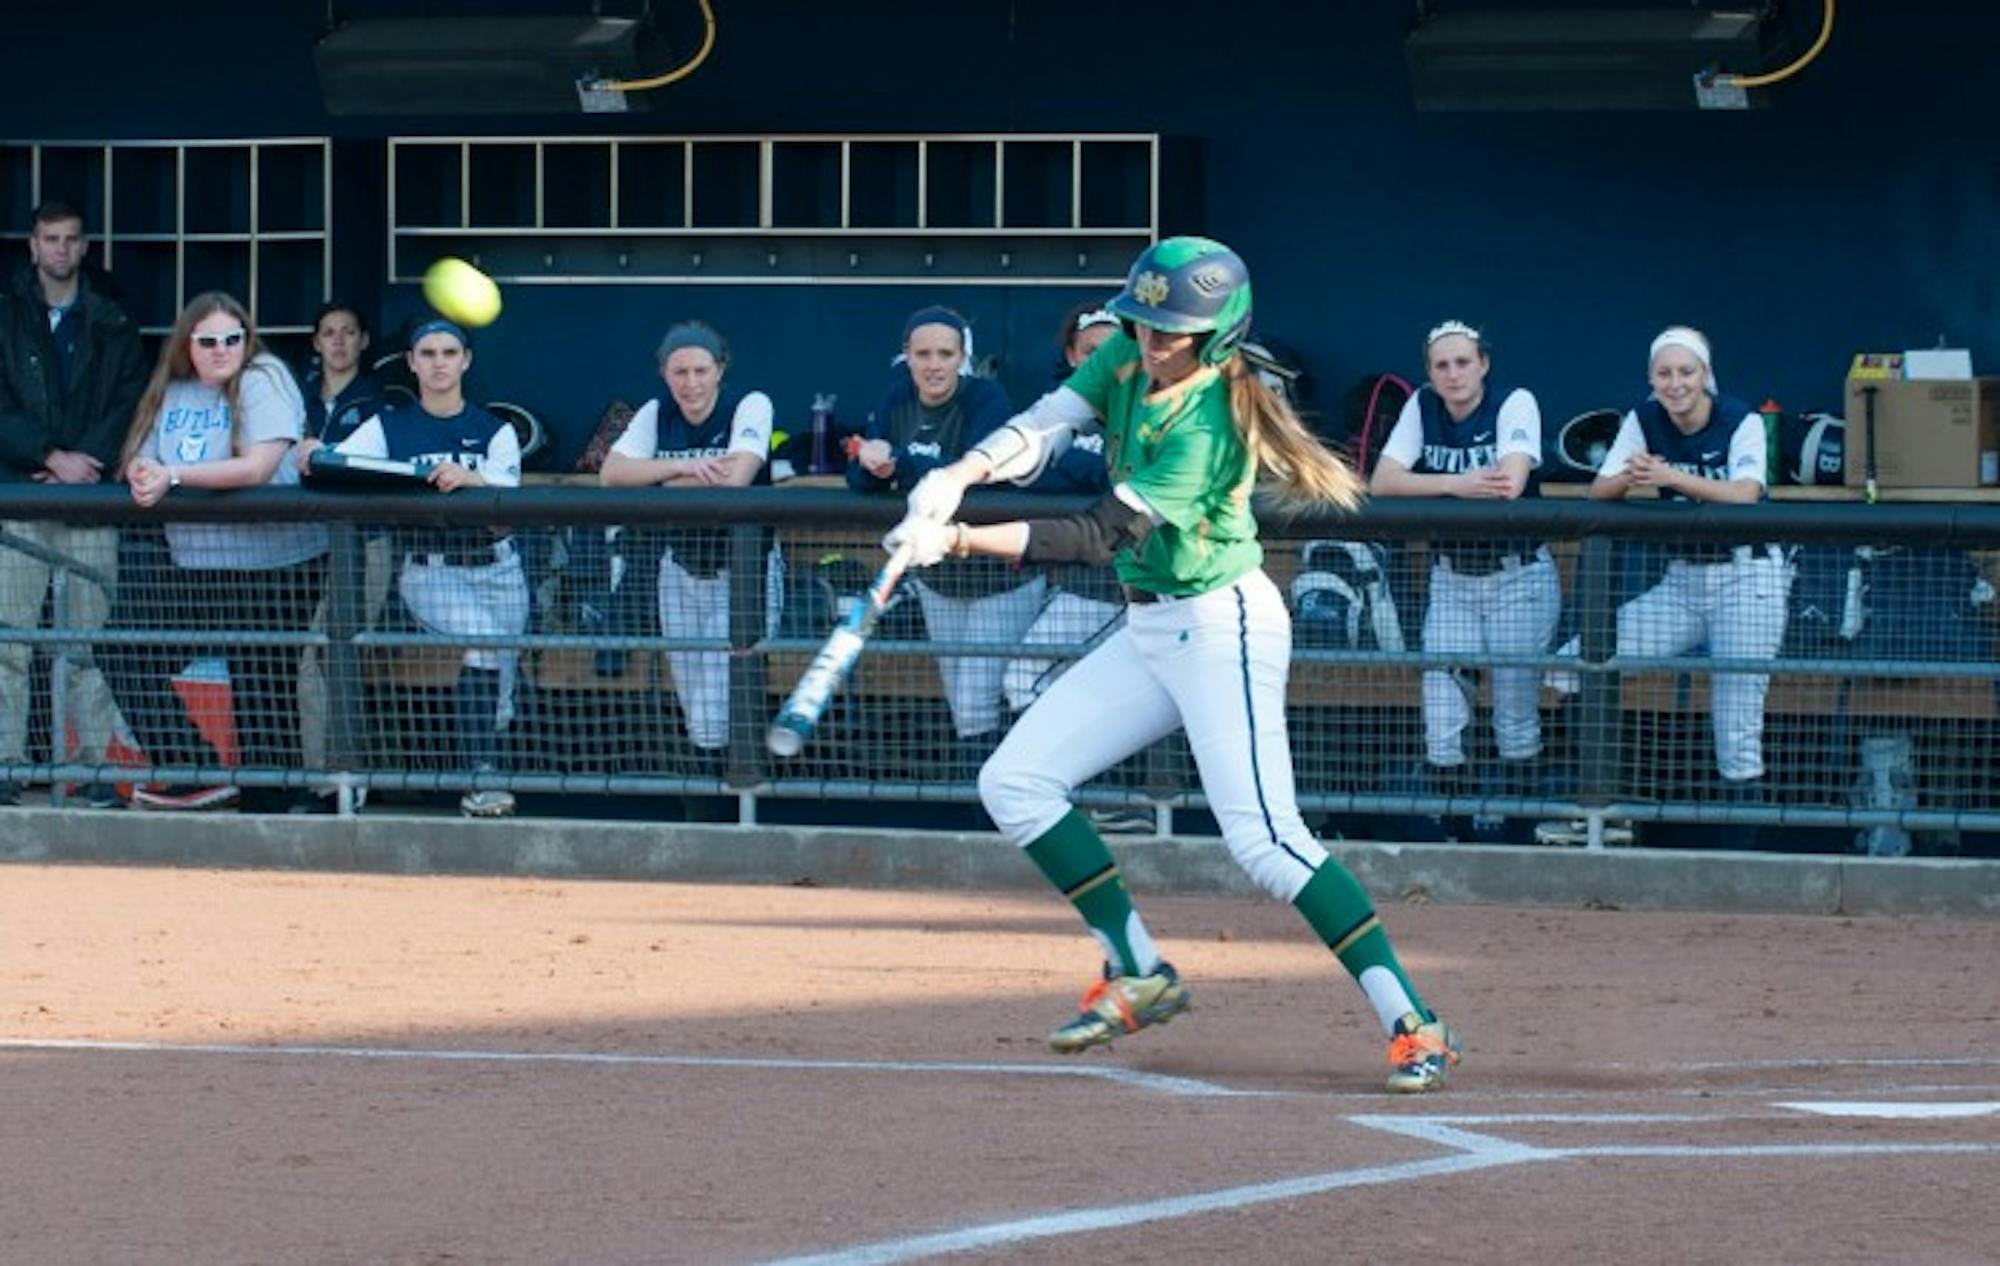 Irish junior center fielder Karley Wester connects with the pitch during Notre Dame’s 5-0 win over Butler on Thursday. Wester had three hits, an RBI and a run scored in Sunday’s 5-3 win over Virginia Tech.